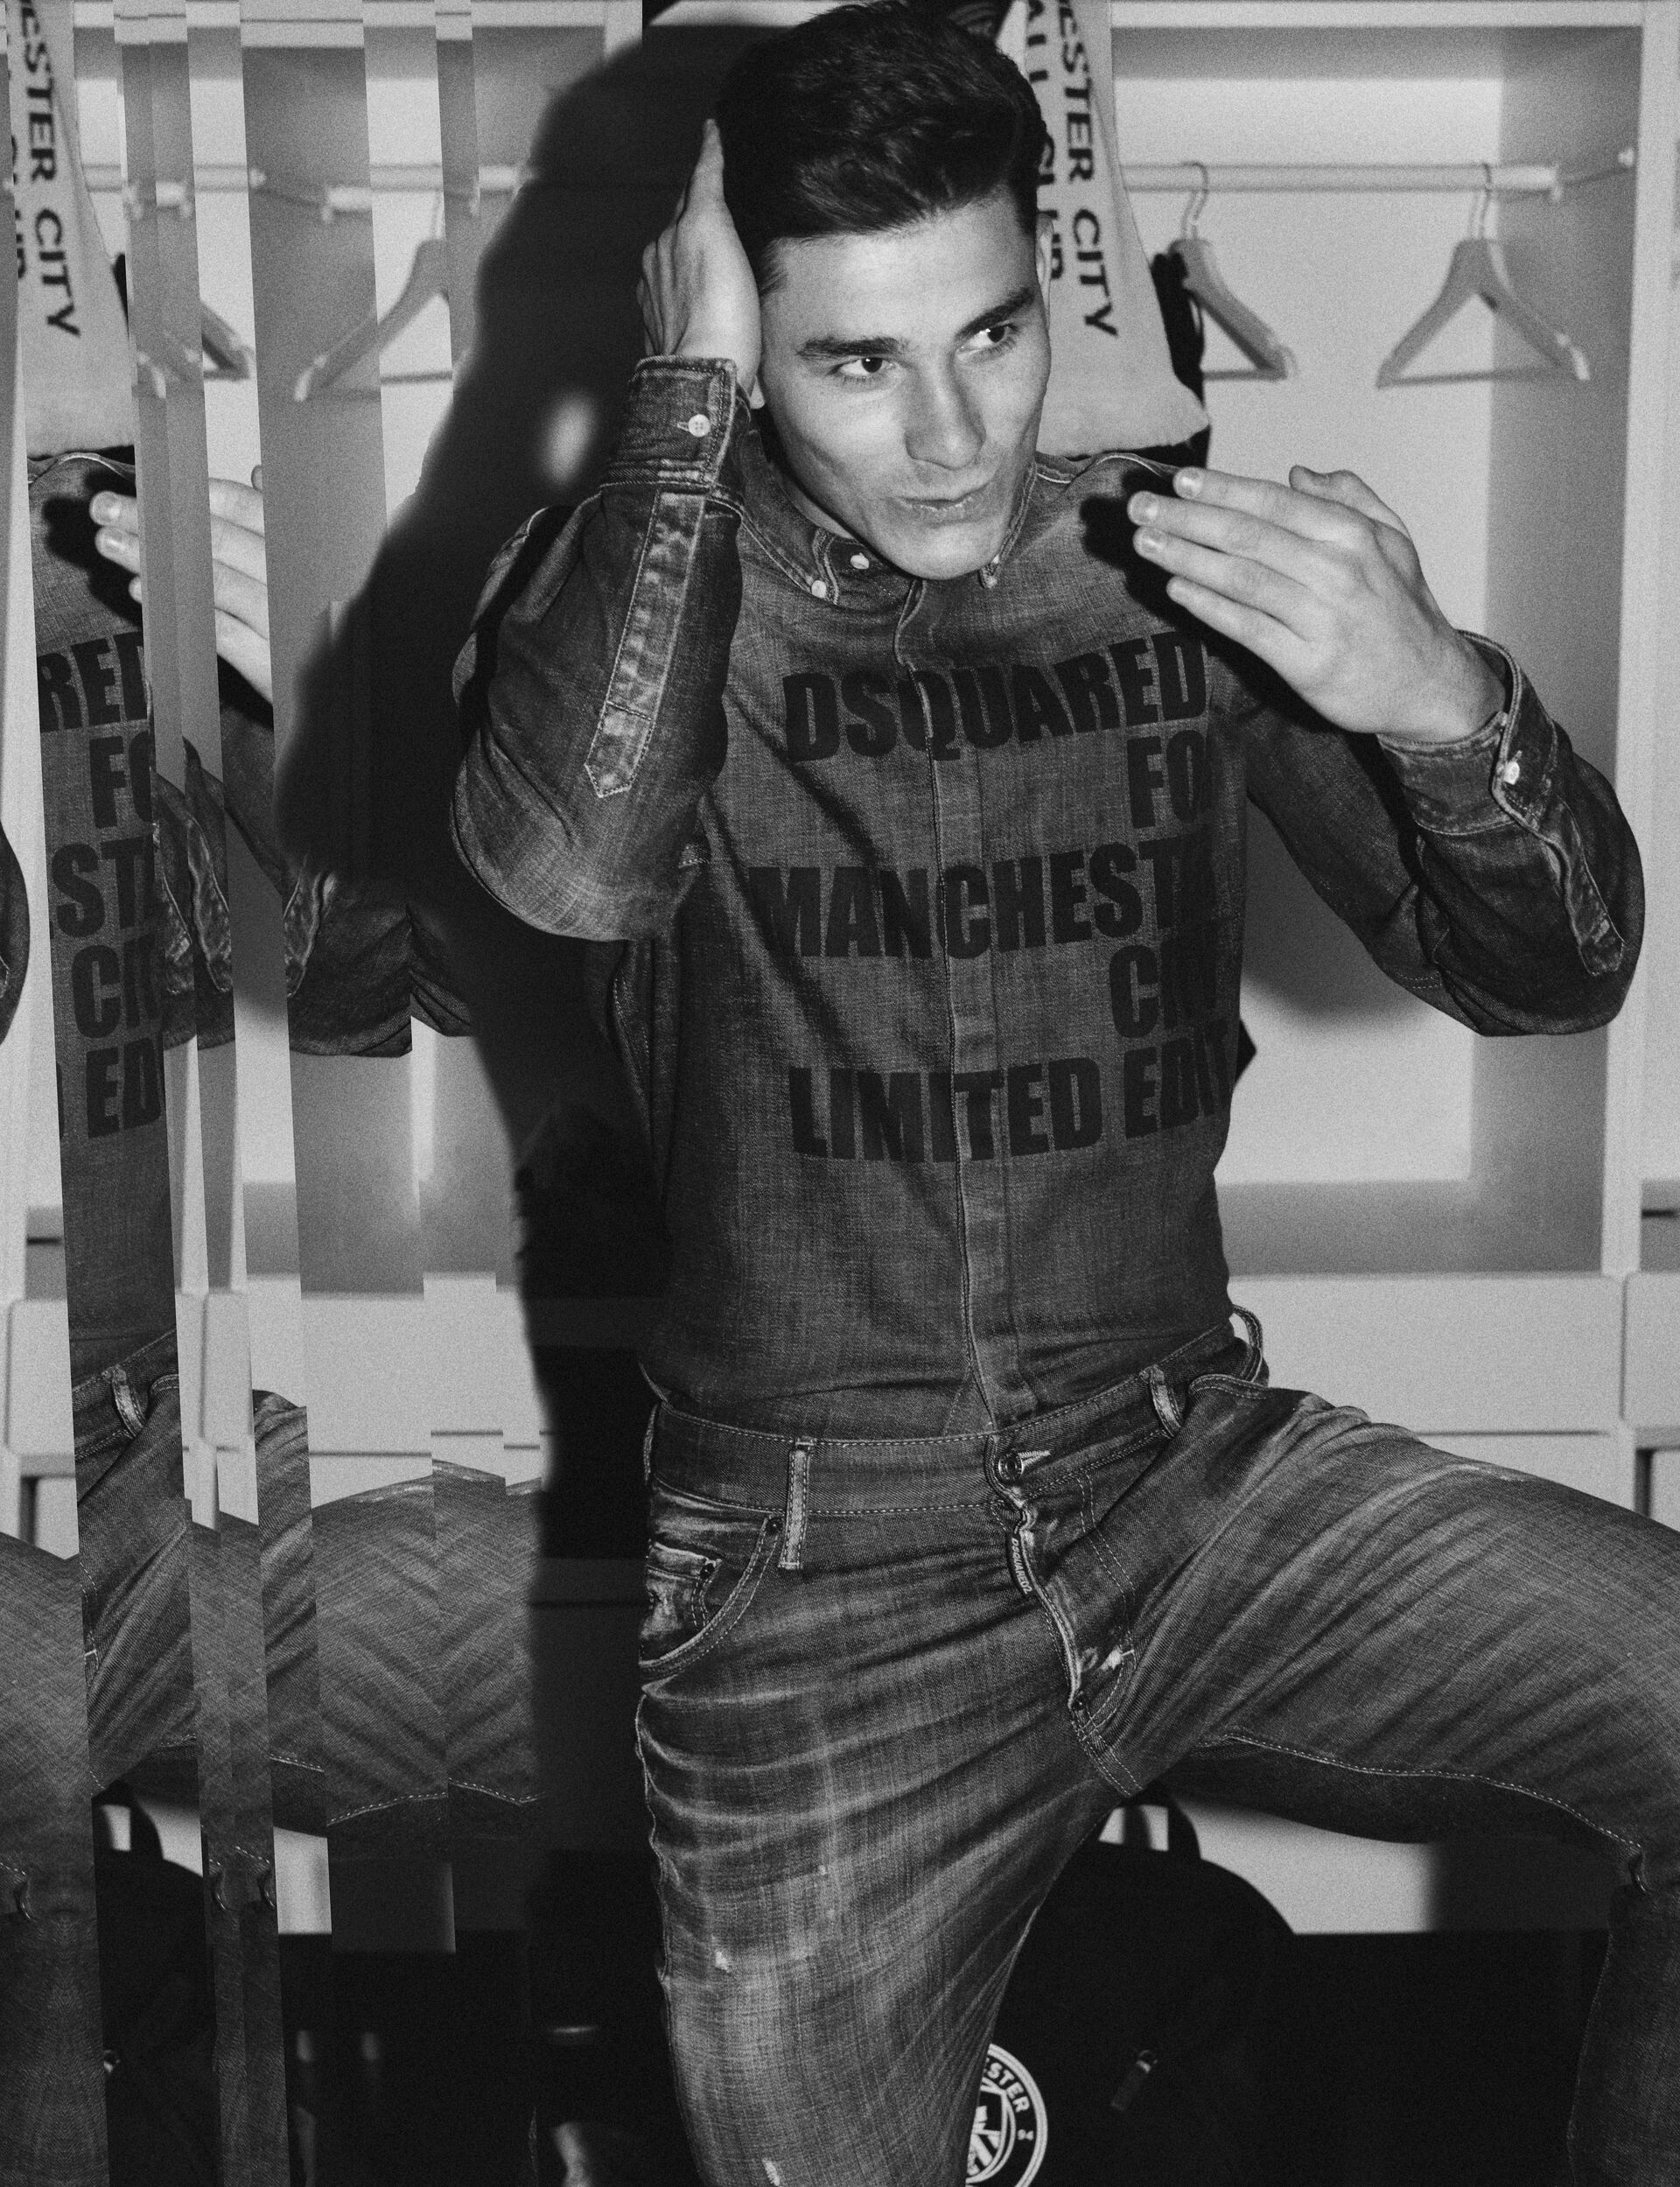 Picture in black and white of julian alvarez wearing a denim shirt and denim jeans from the new dsquared2 x manchester city capsule collection